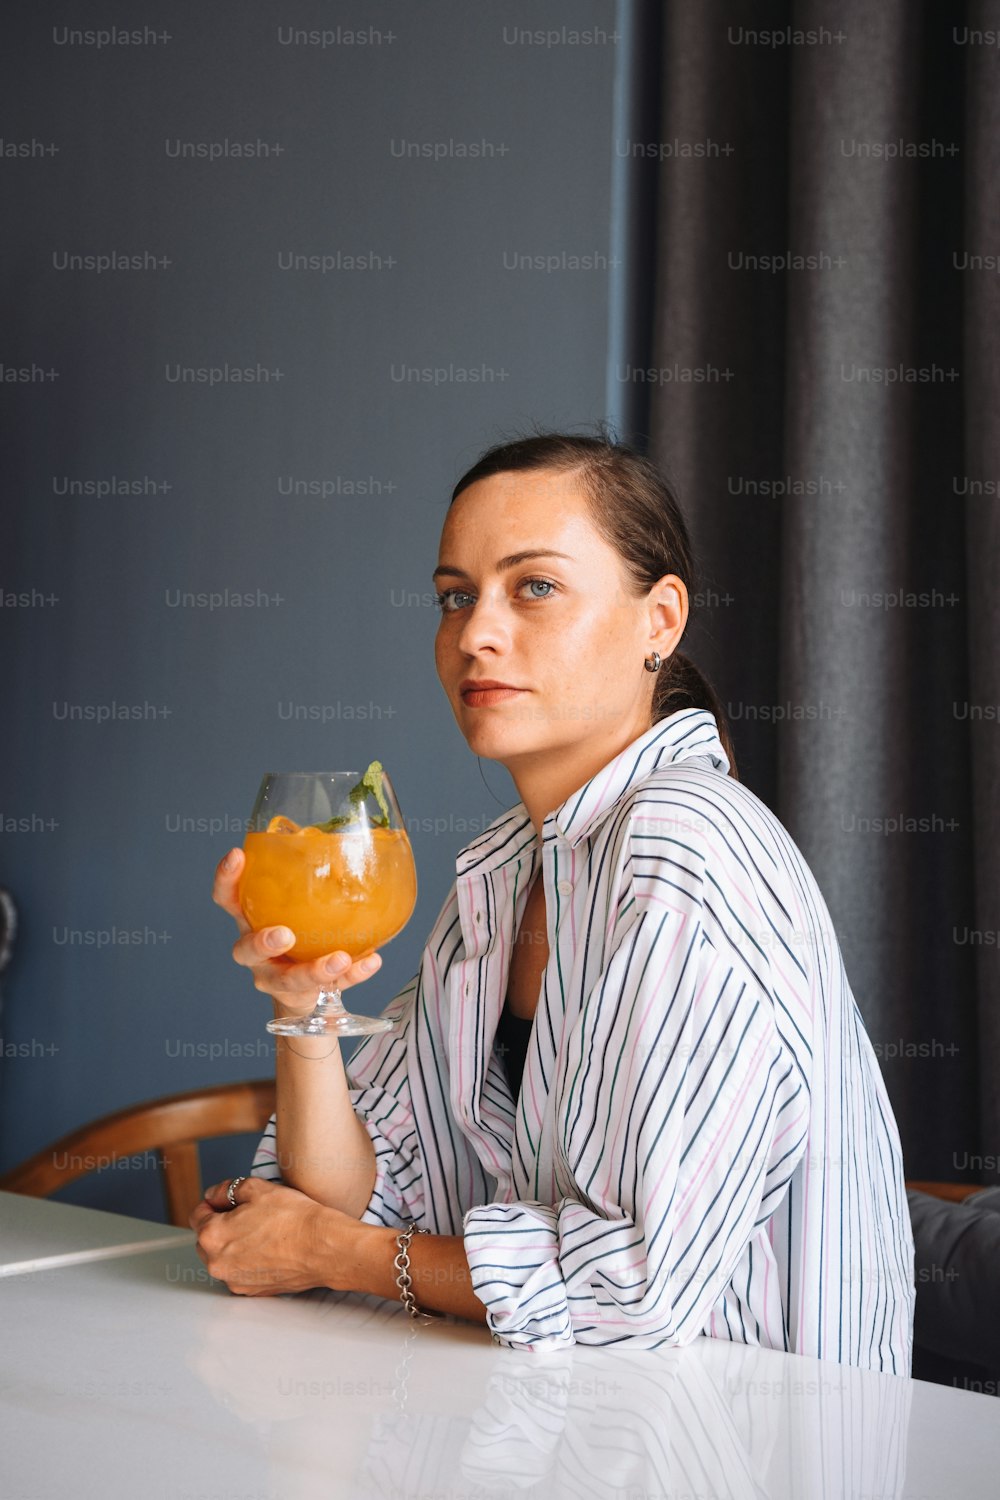 a woman sitting at a table holding a glass of orange juice